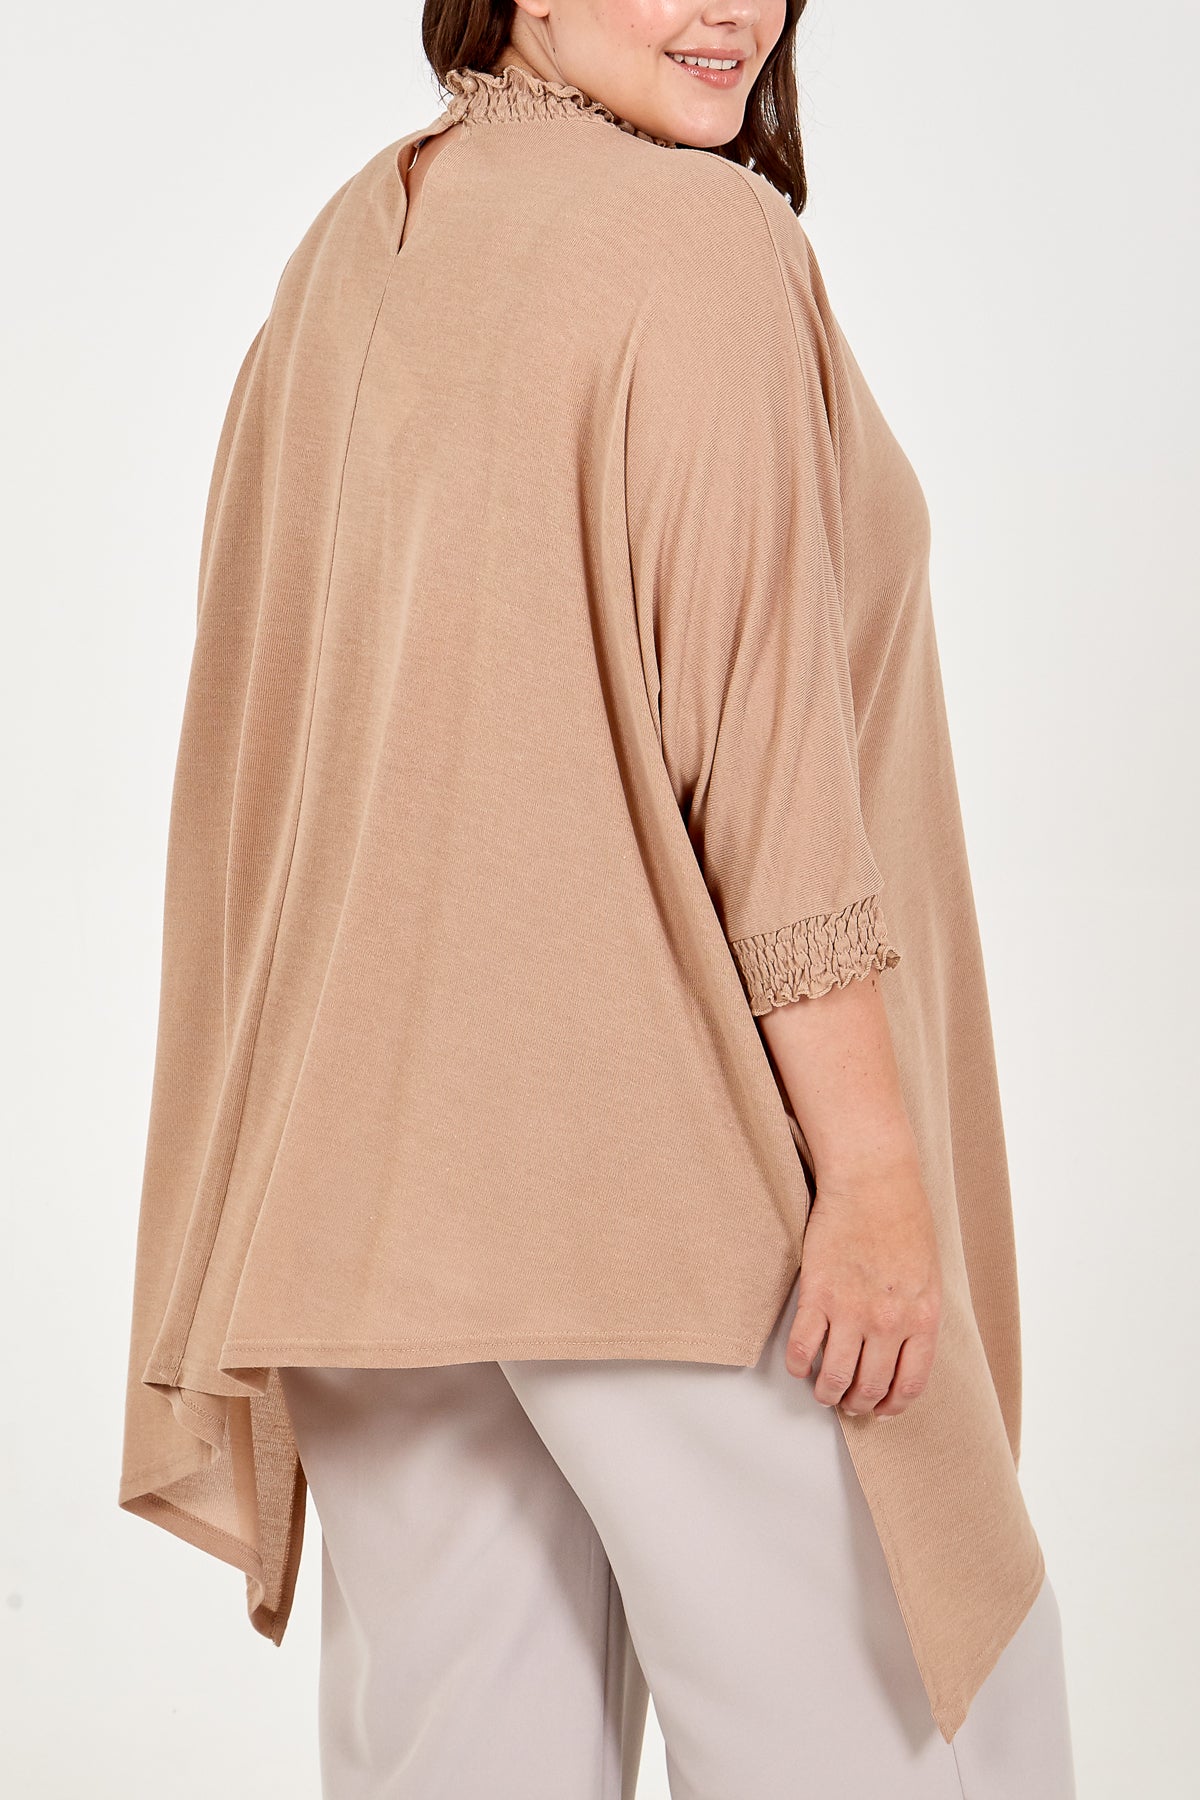 Curve Asymmetric Top With Shirred Collar